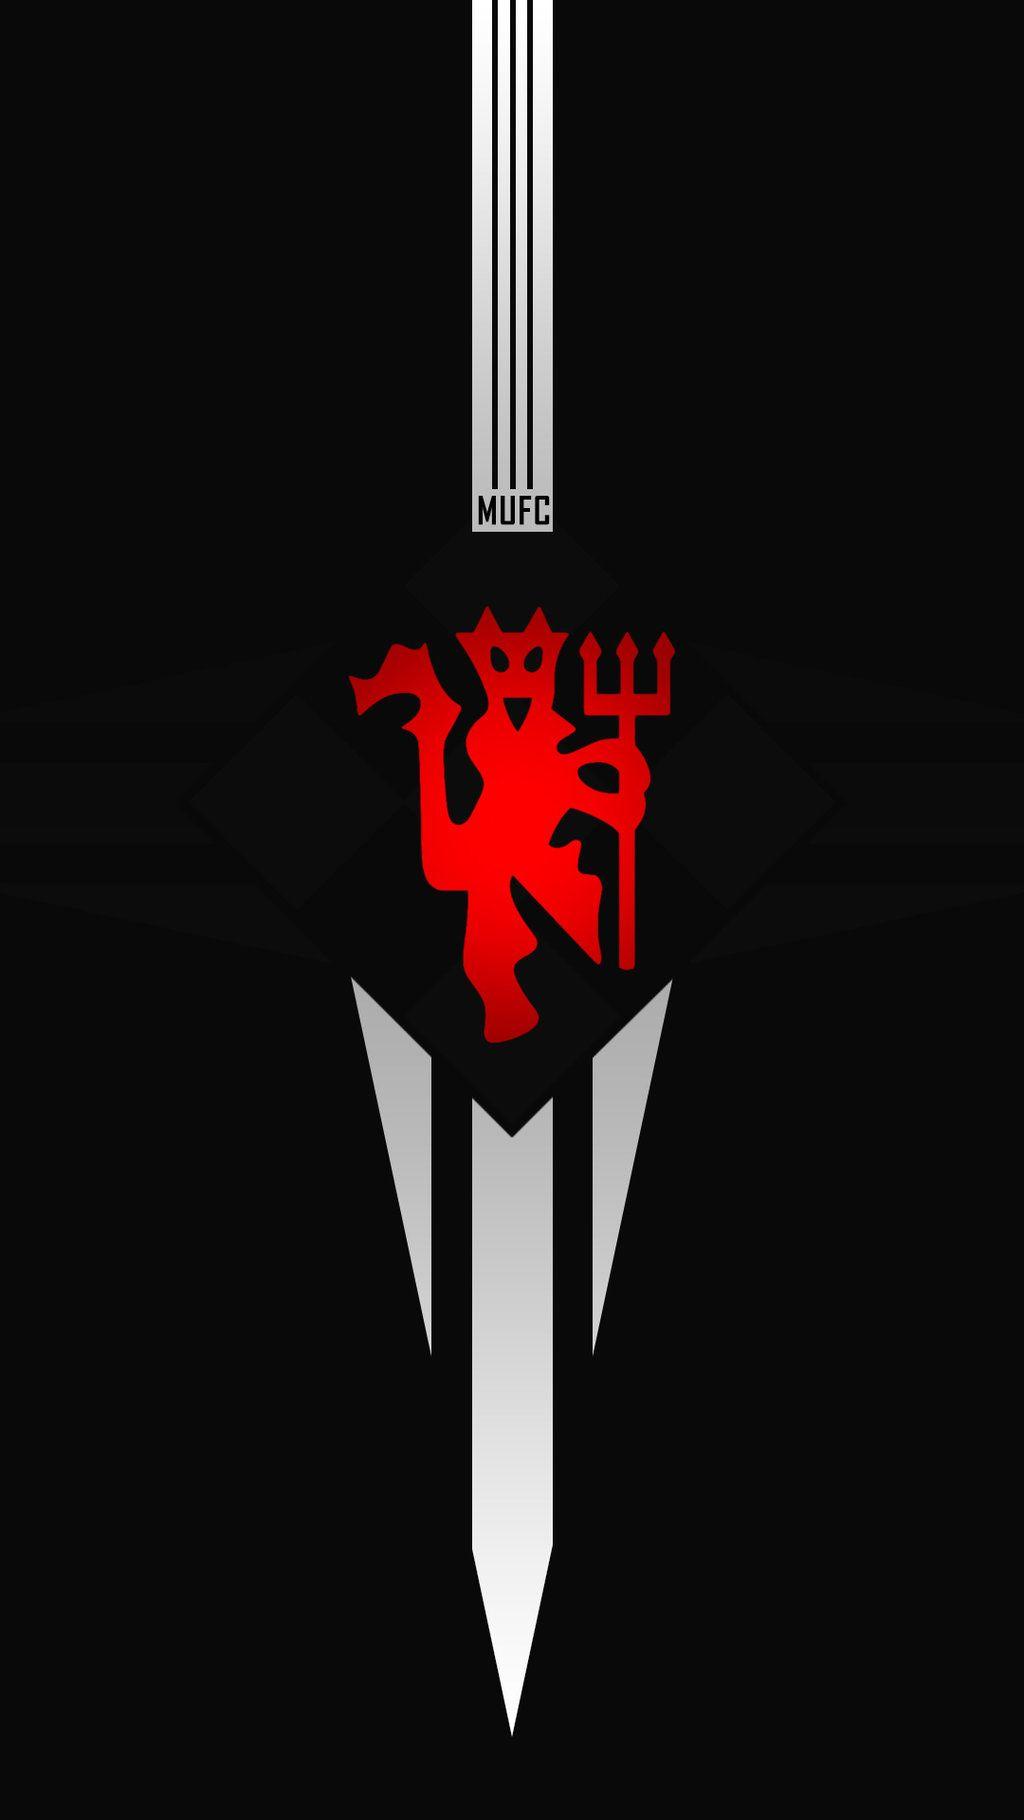 Manchester United Wallpapers - Wallpaper Cave